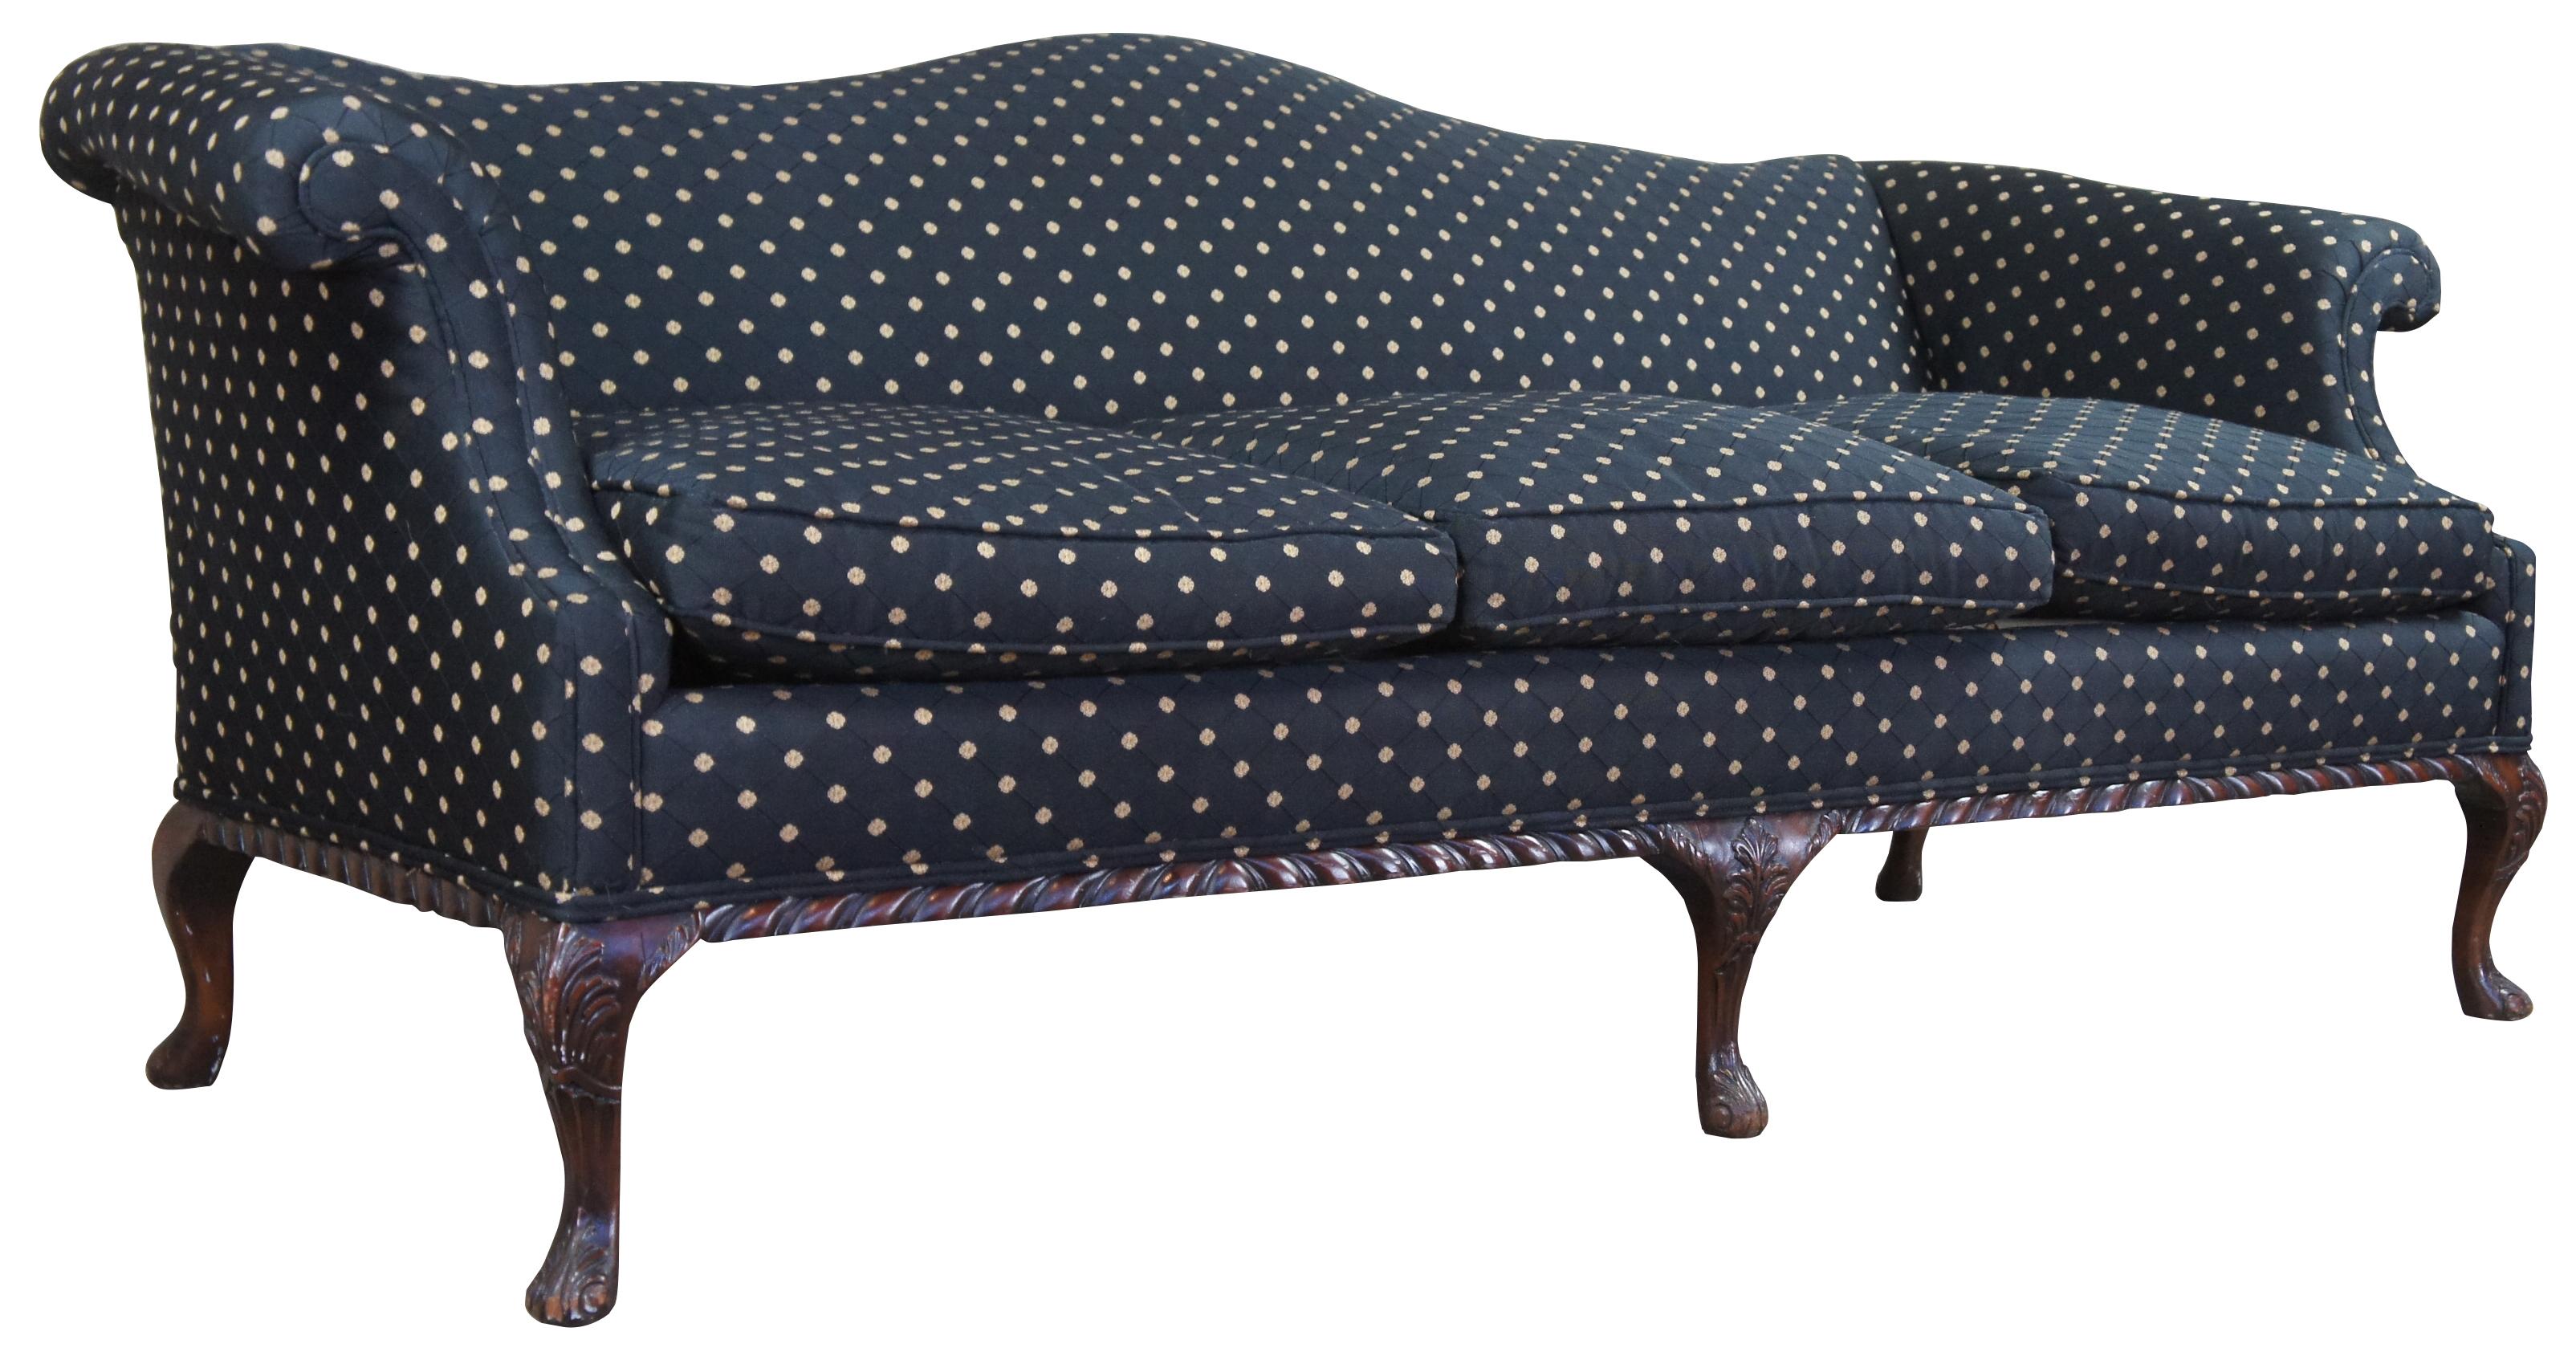 Antique three seat camelback sofa or couch.  Made of mahogany with carved accents, scrolled arms, and downfilled cushions.  The Robert Allen Wavecrest fabric features a black embroidered florets connected by diamond pattern. 
